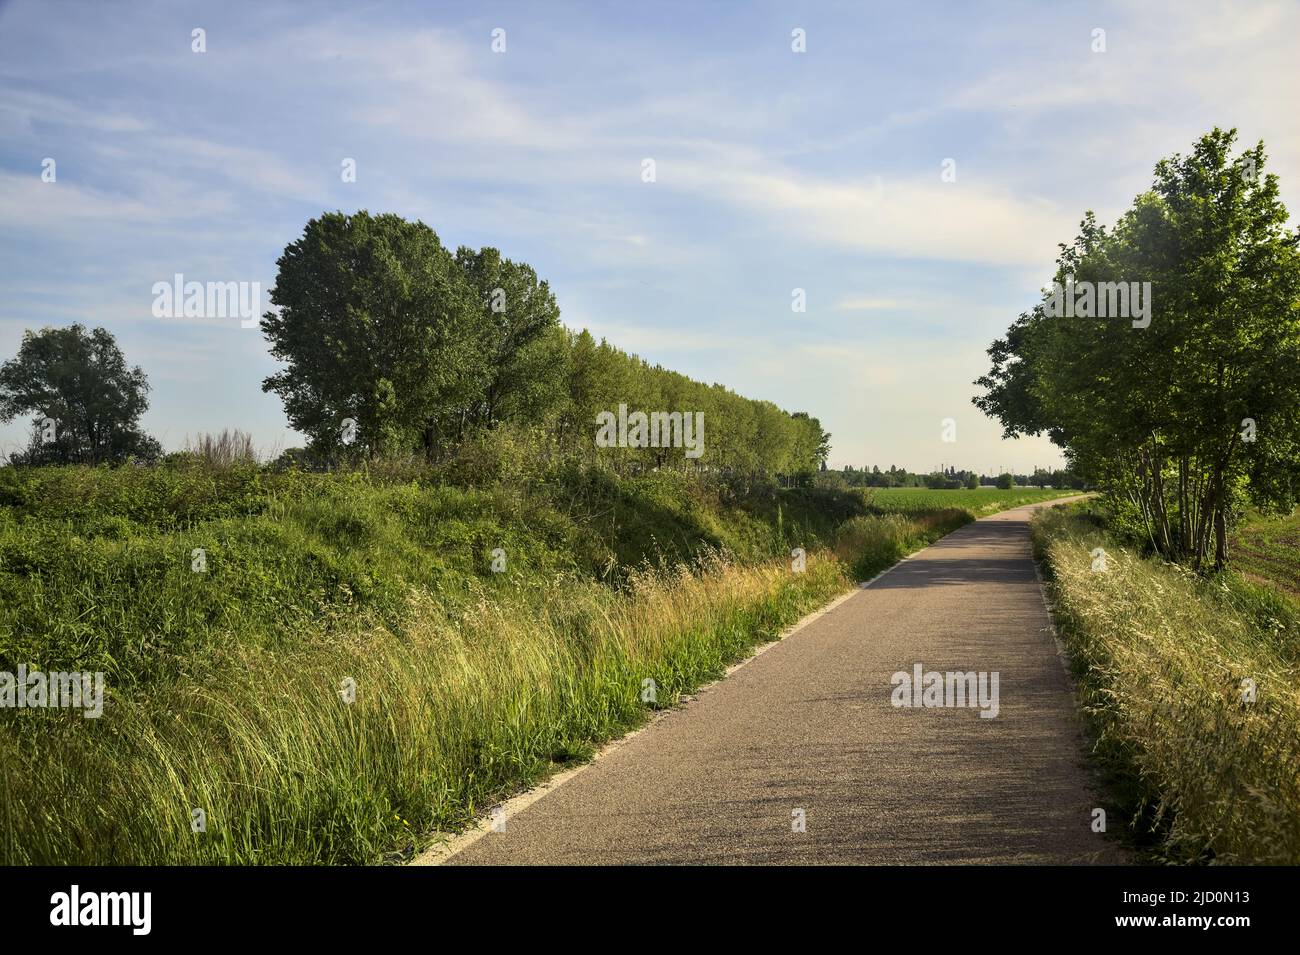 Country road in the middle of cultivated fields with a row of poplars at the edge of a field at sunset Stock Photo